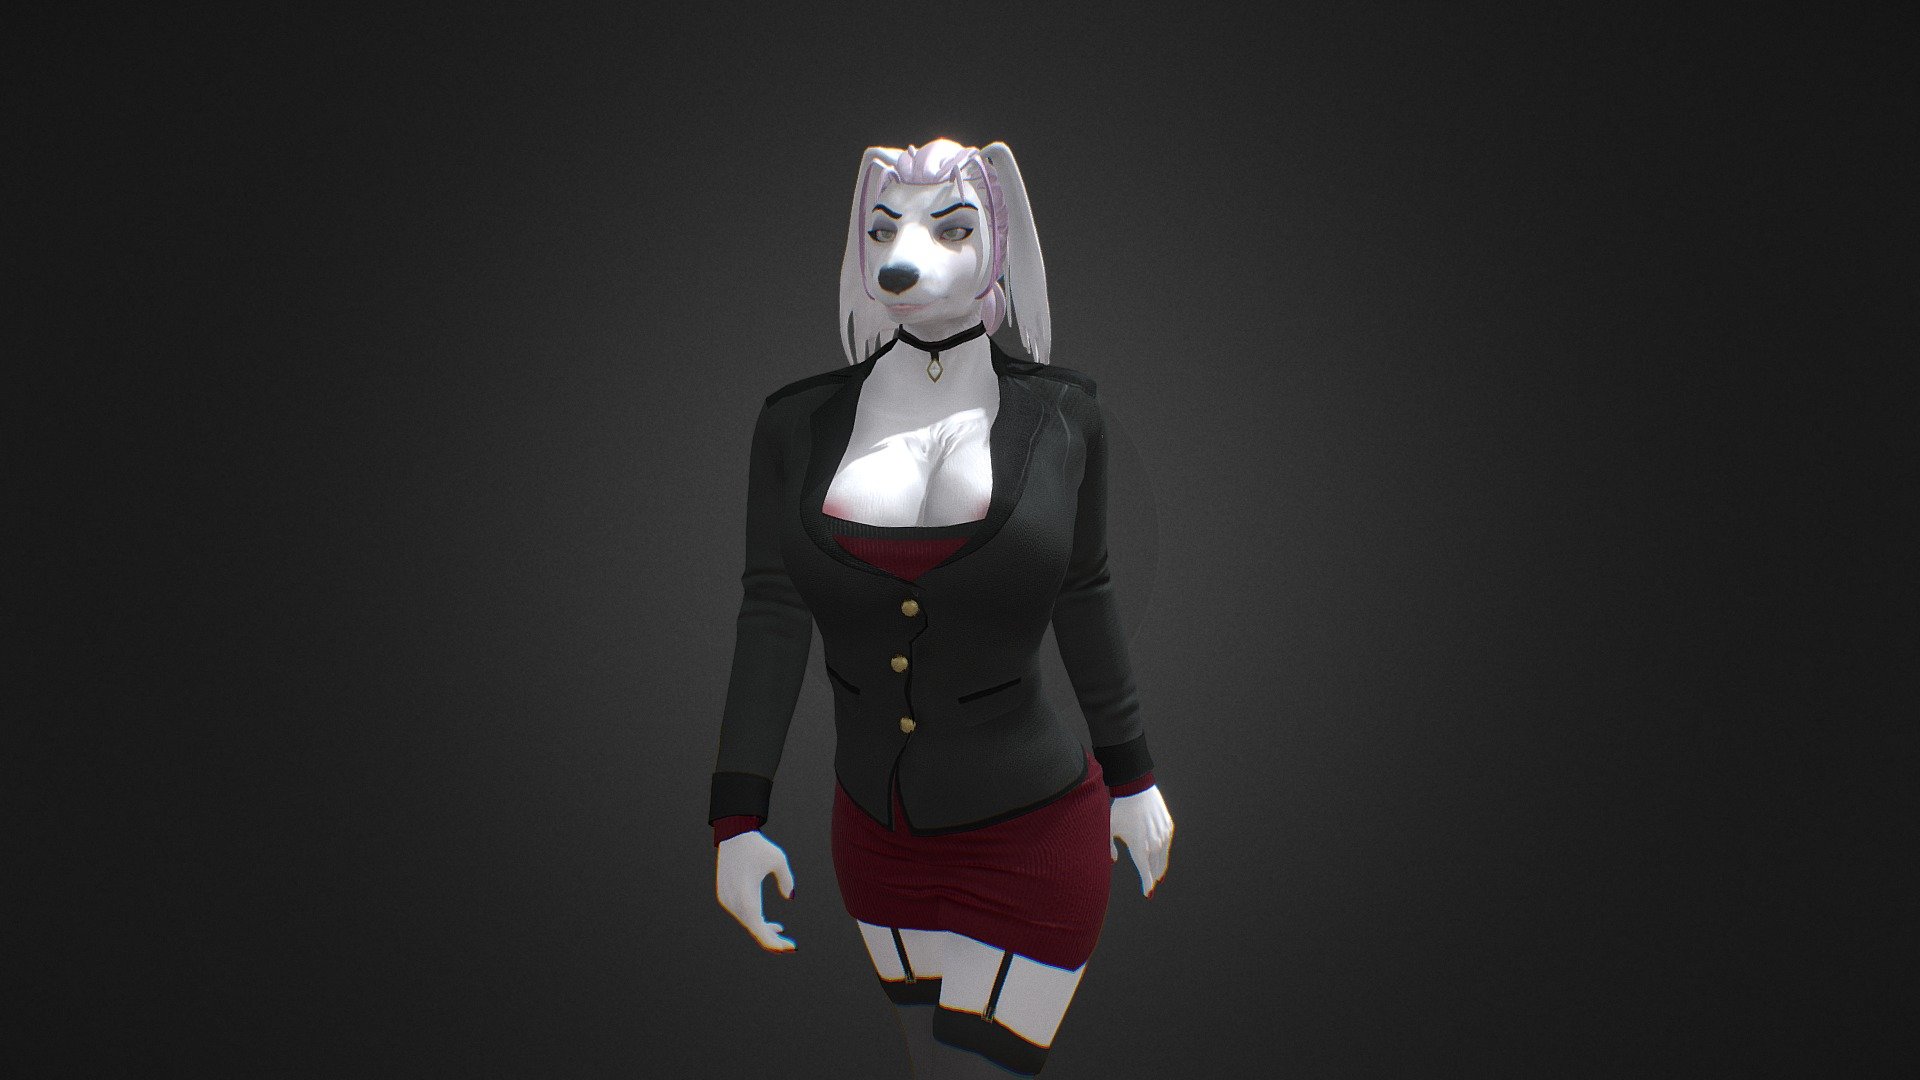 This is a 3D middle poly stylized character for PC NSFW game “Clarity” that is currently in development. Character is designed and created by me for this game. Model also includes naked body with “additionals” for story and gameplay purposes. Current model features only “Walk cycle” due to my software limitations. 
My pipeline for creation: 
1. Photoshop, 2d concept art + final references; 
2. Zbrush, high poly model with details;
3. Maya, retopology, UV maps; 
4. Substance Painter + Photoshop, PBR textures; 
5. Maya, rigging and animation. Final result is being used within Unity engine 3d model